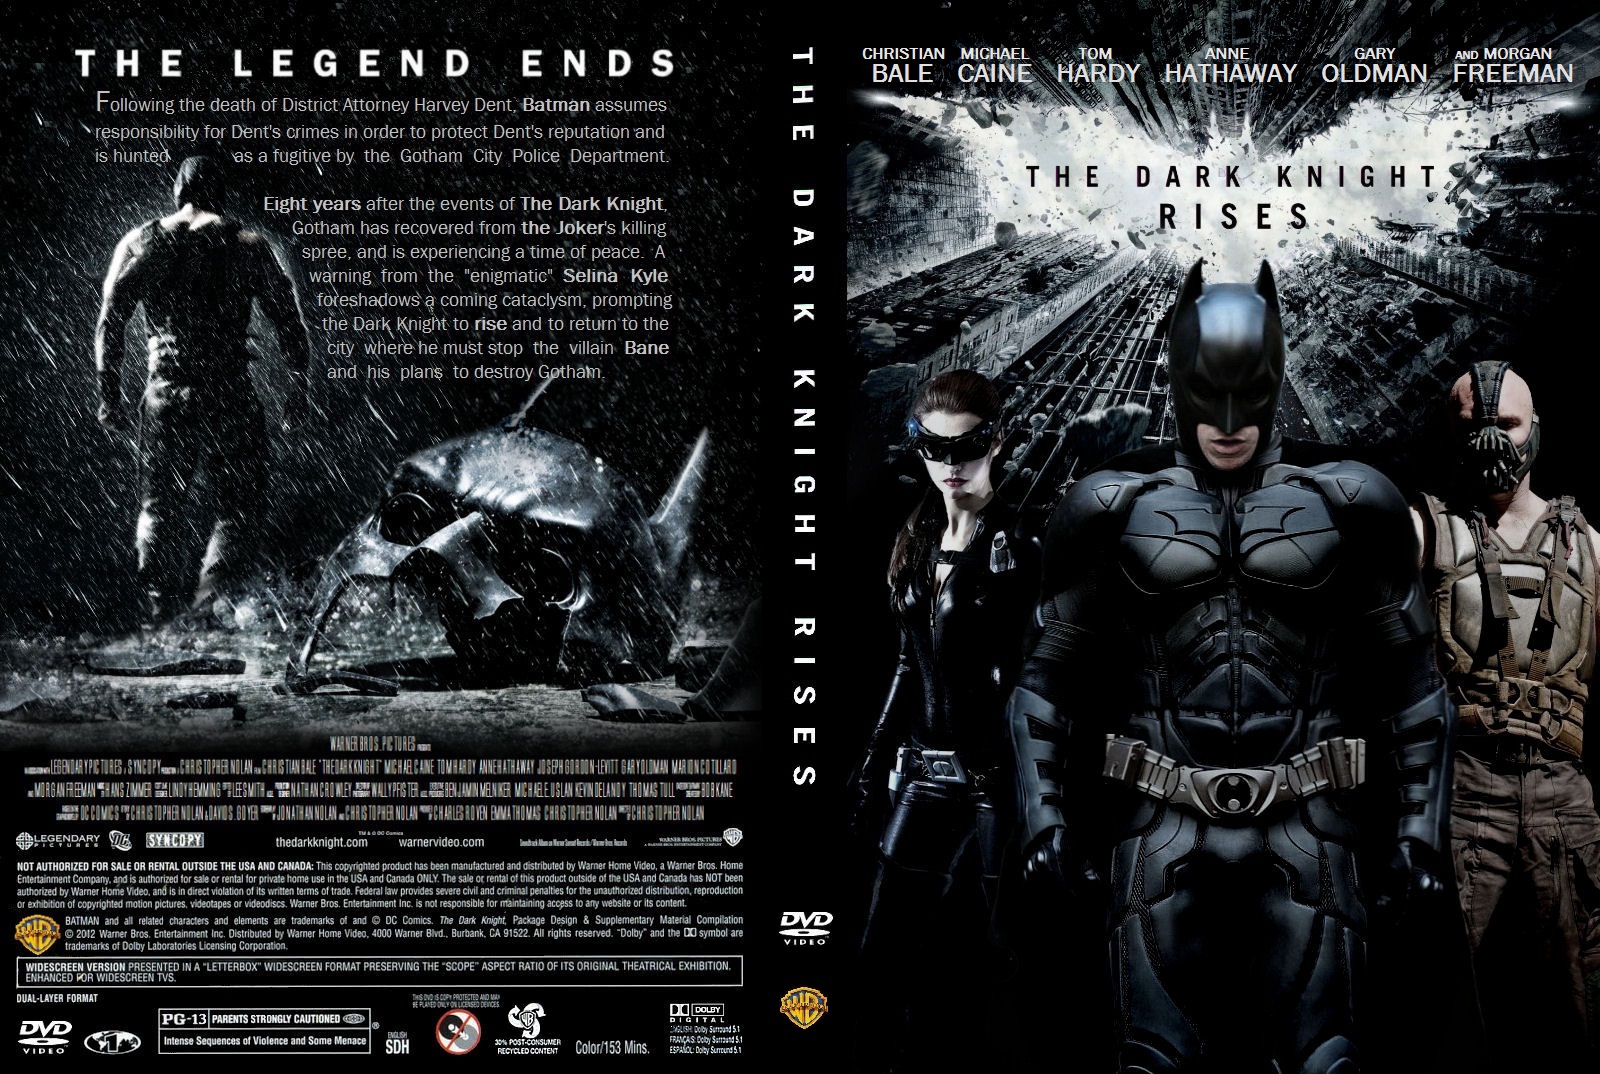 The Dark Knight Rises DVD Cover by Mike1306 on DeviantArt